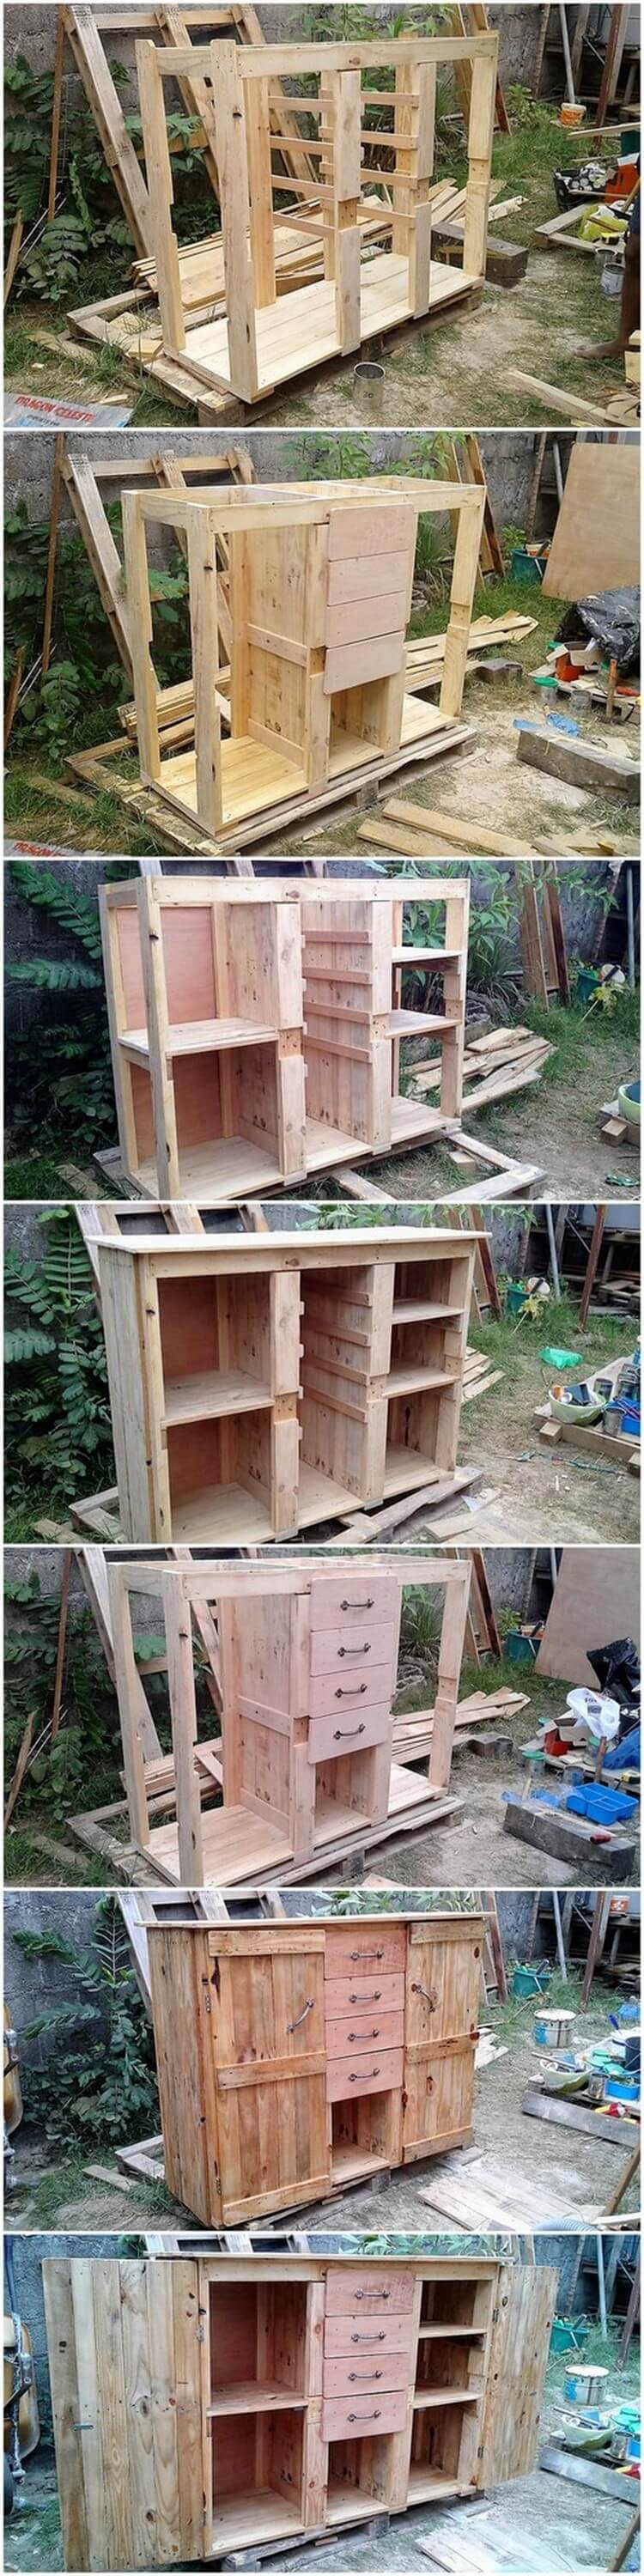 DIY Wood Pallets TV Stand or Media Cabinet: Step by Step ...